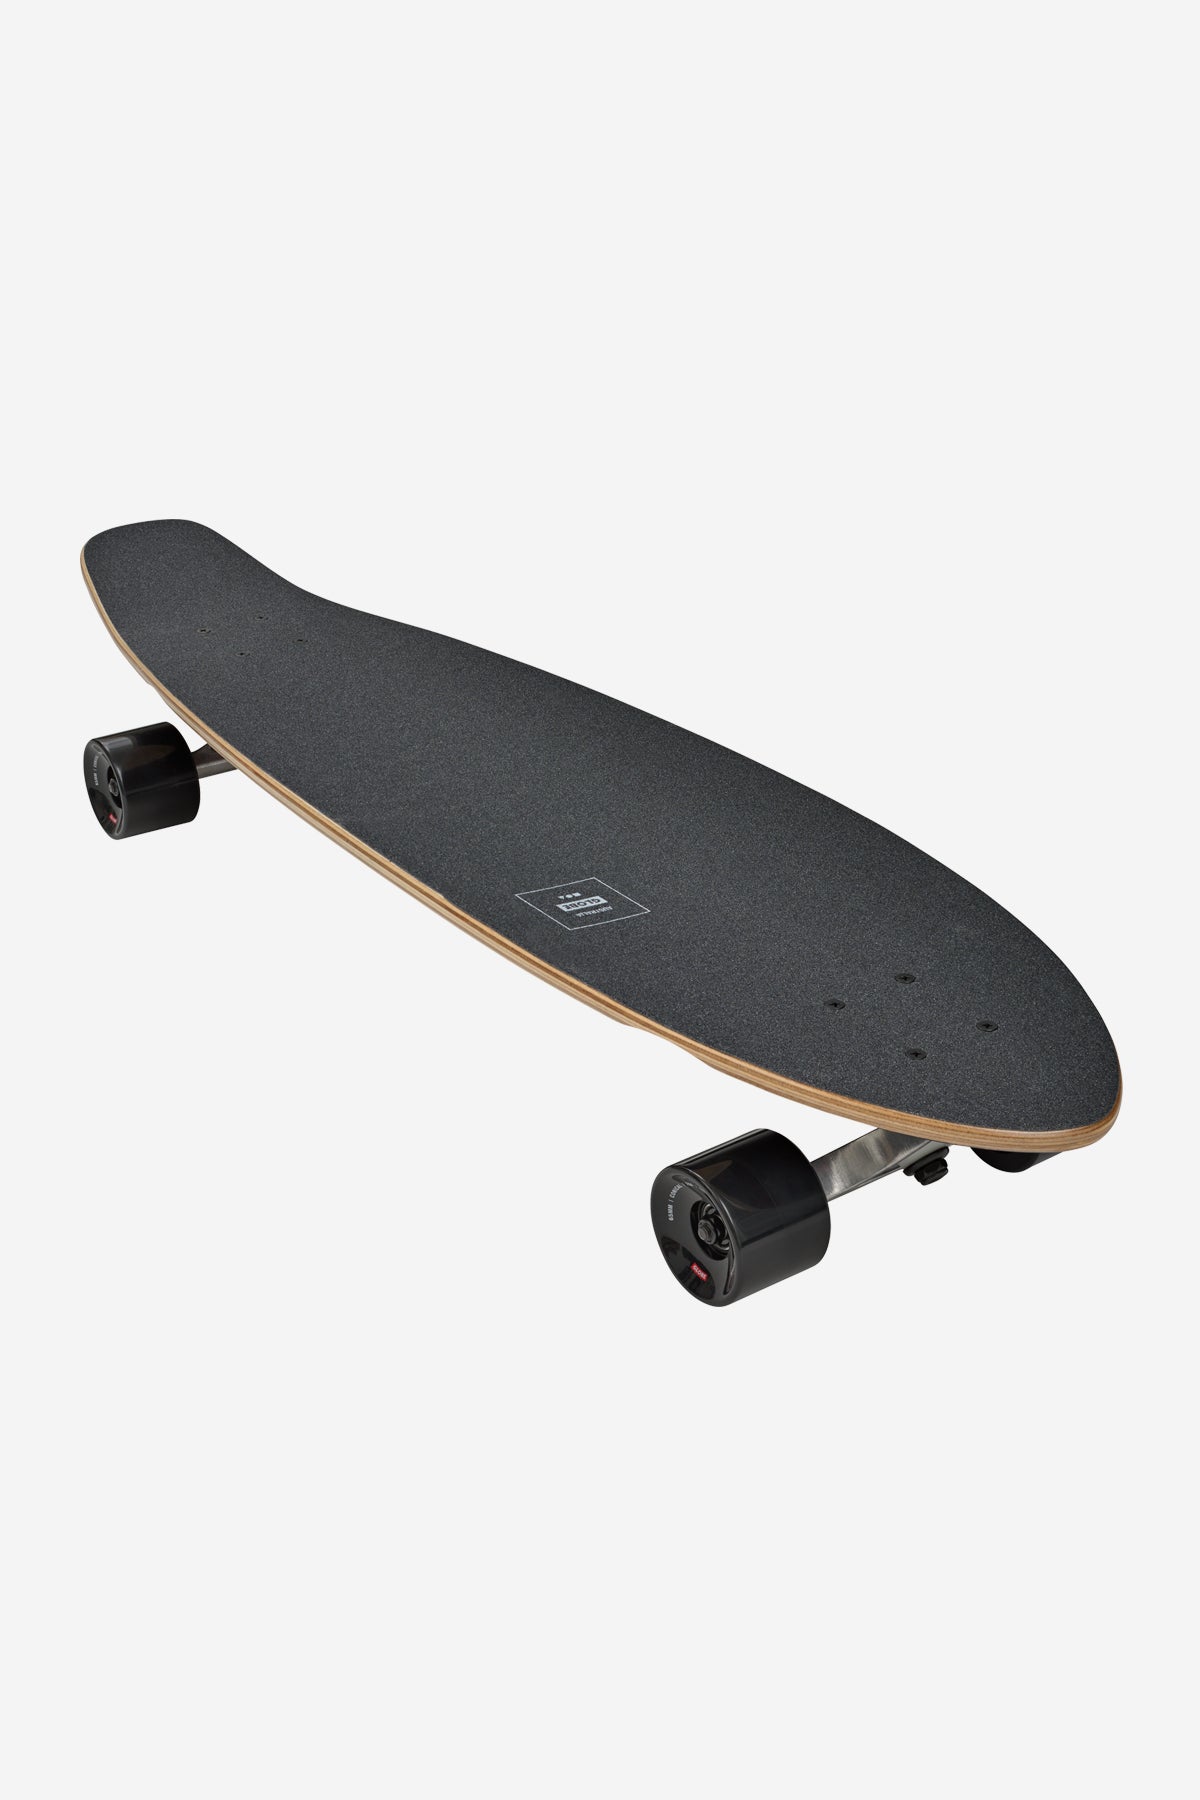 Globe - The All-Time - Red Marble Stack - 35" Longboard